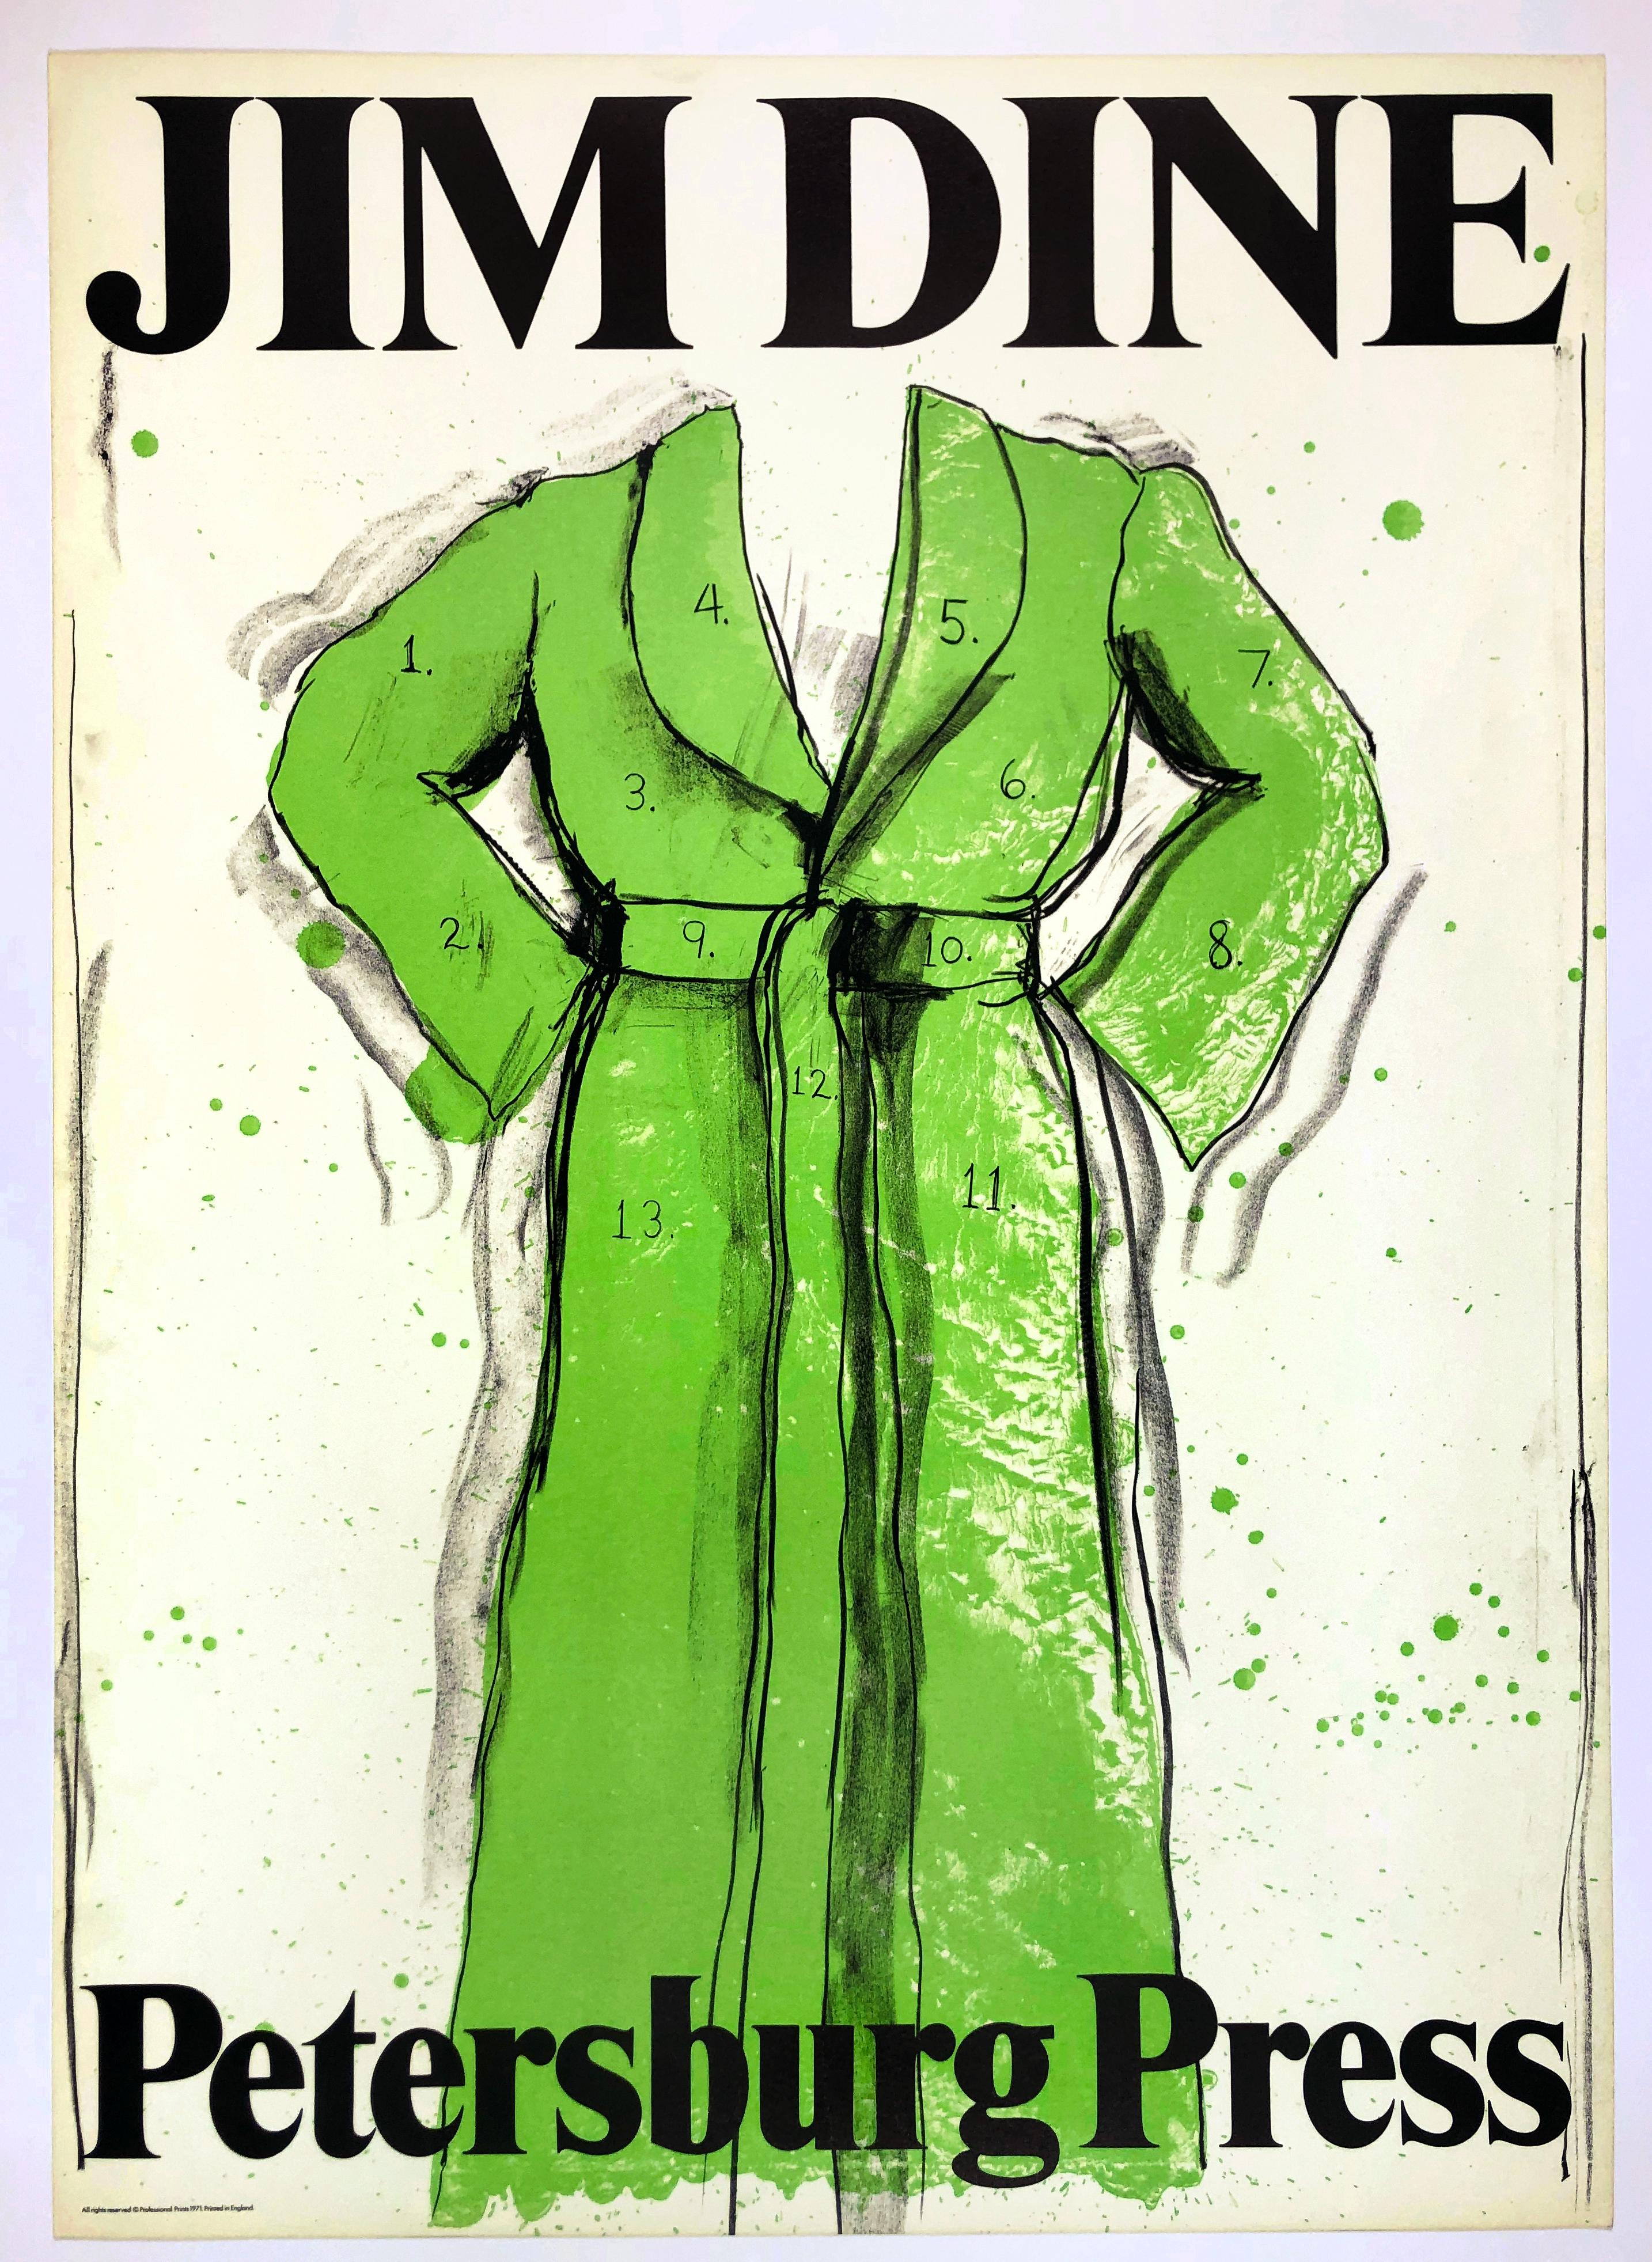 This original, vintage poster on poster stock features one of Jim Dine's most iconic motifs: the bathrobe. In 1964, Dine saw an ad in the New York Times: “The ad shows a robe with the man airbrushed out of it. There was nobody in the bathrobe, but